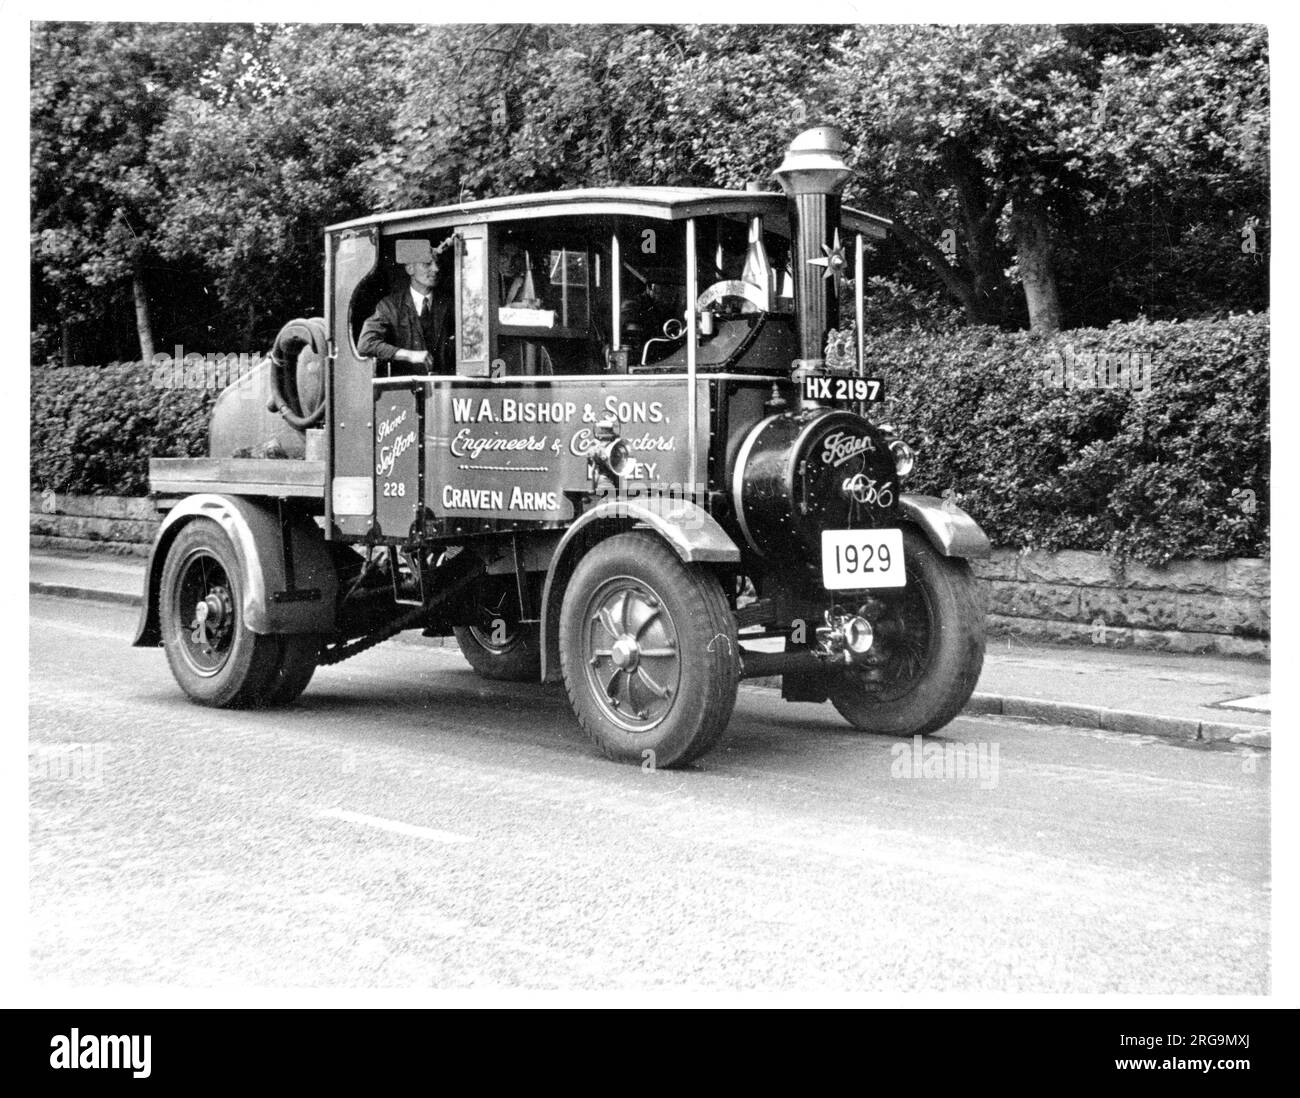 Foden 6-ton Tractor, regn. HX 2197, number: 13832, 'The Dorset Wanderer'. Built in 1930 by Edwin Foden, Sons and Co of Elworth Works, Sandbach, powered by a 4 Nhp compound steam engine. Stock Photo